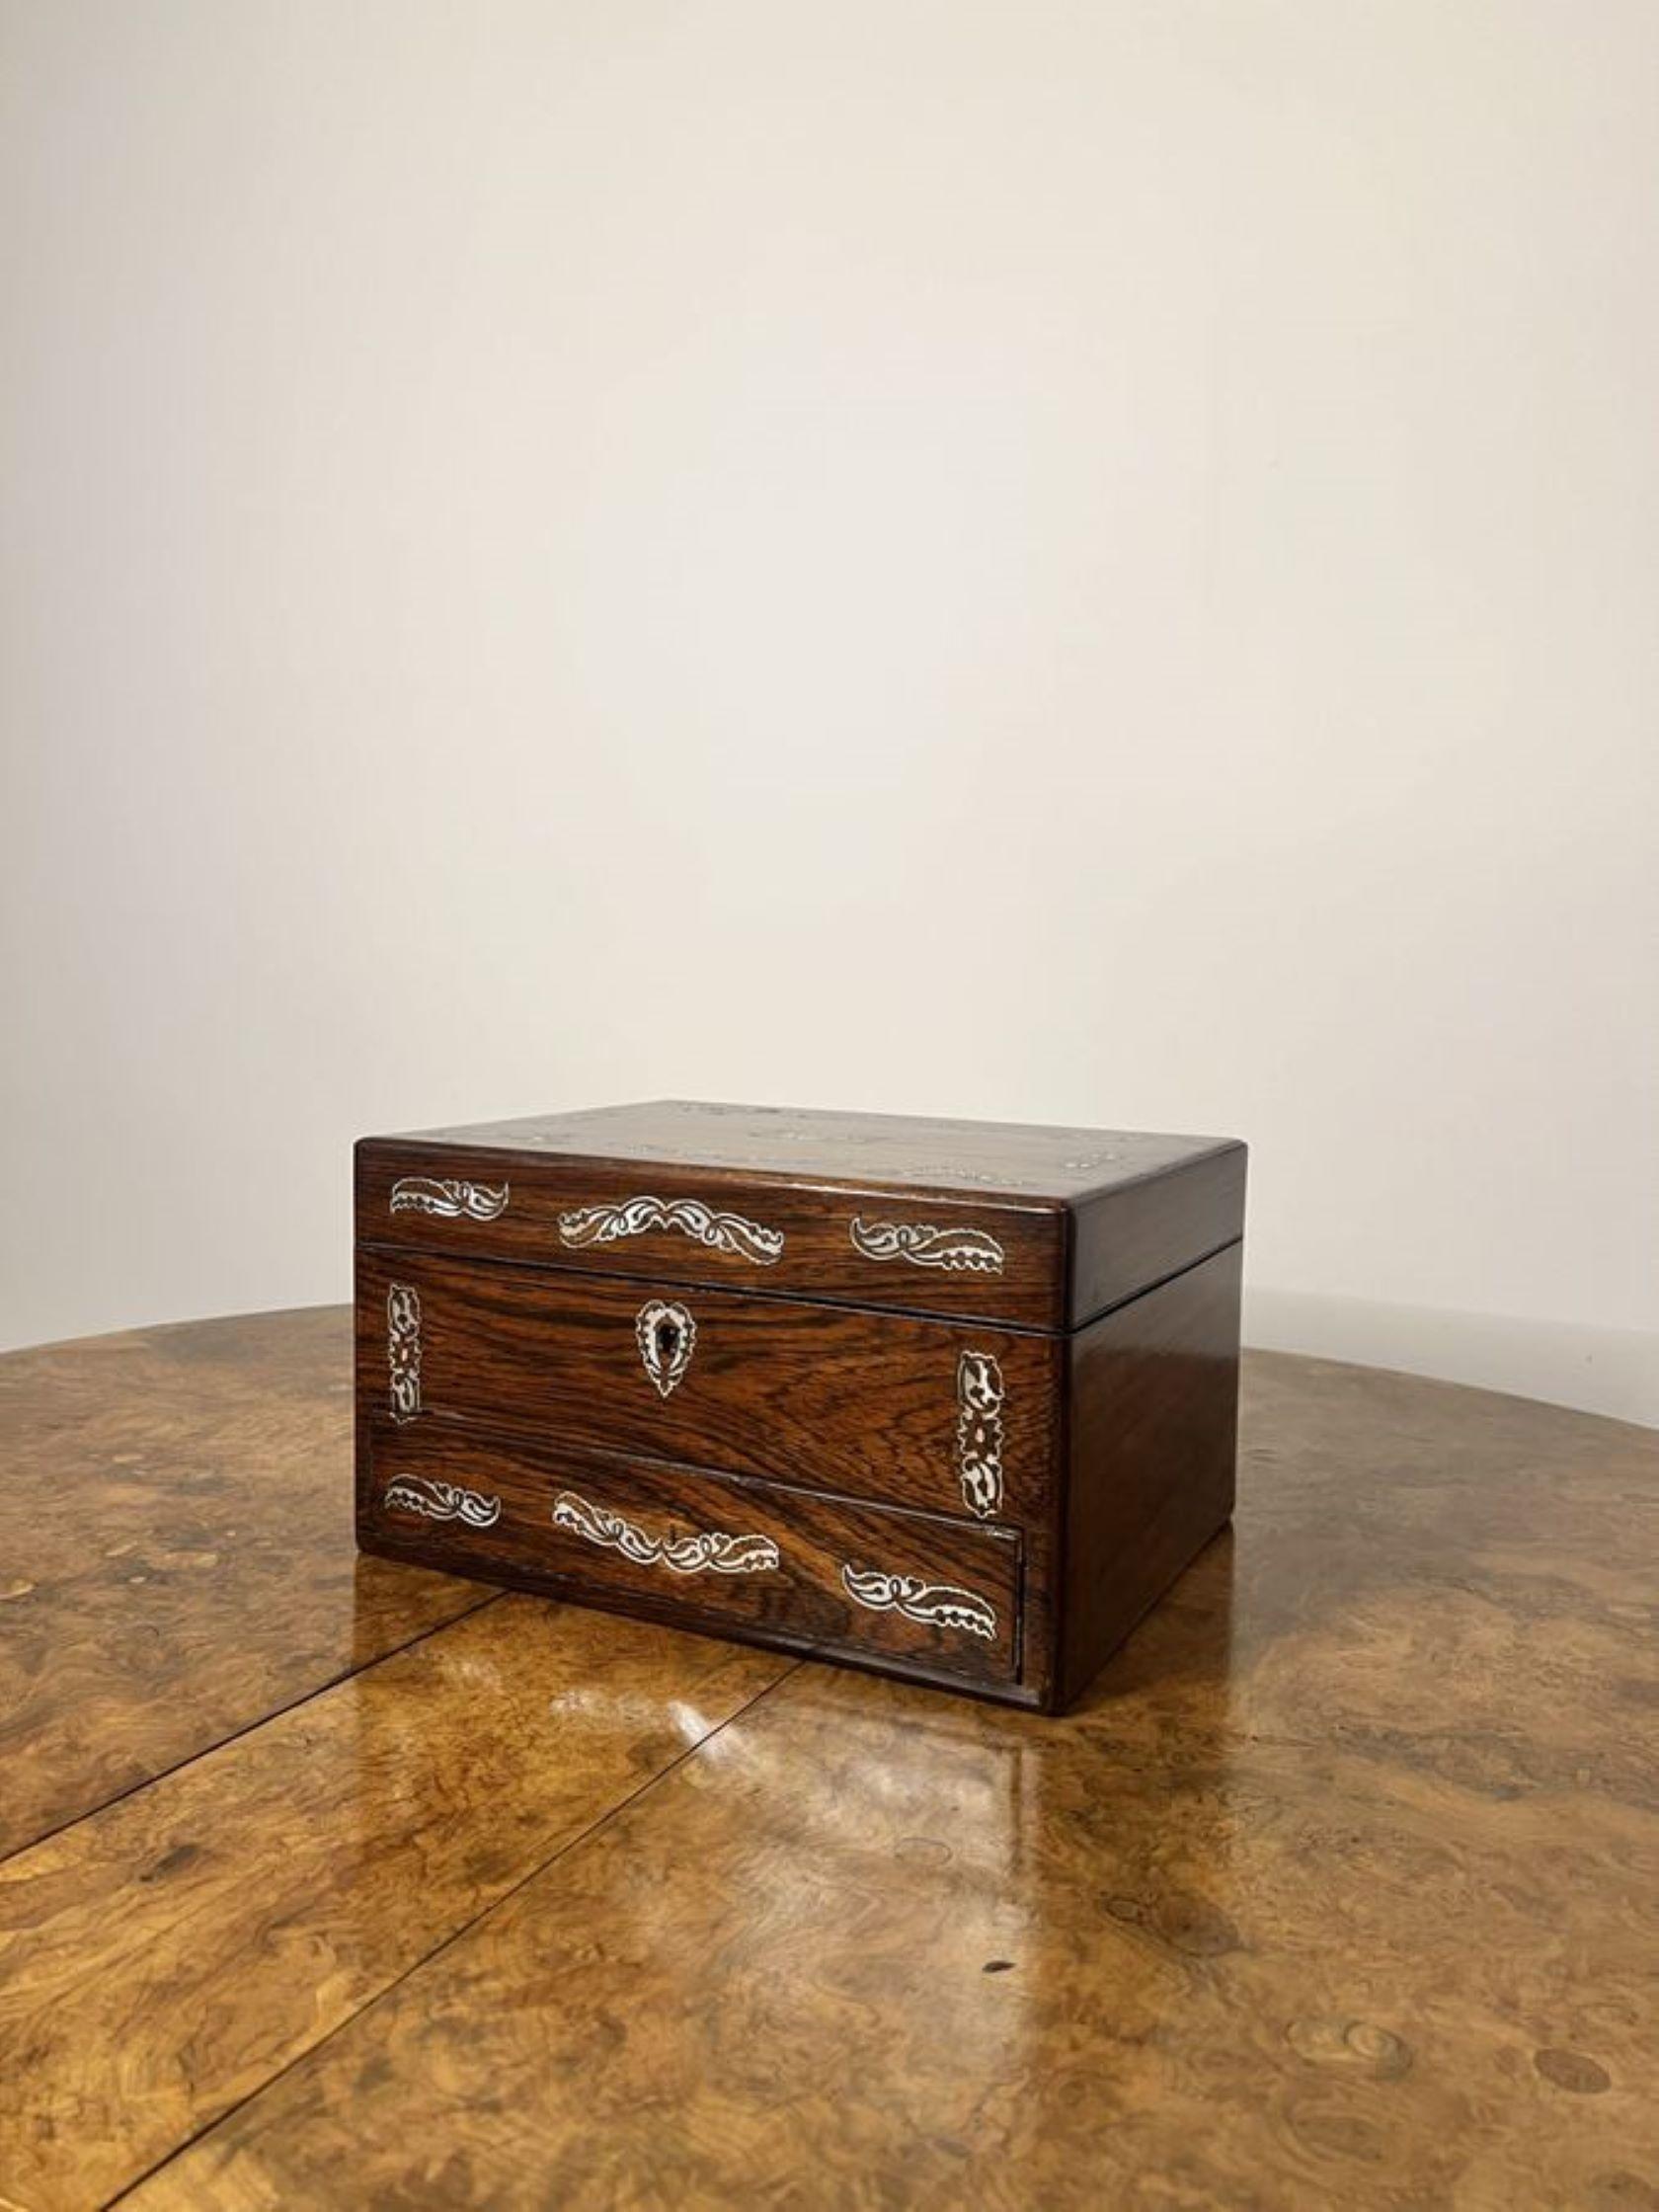 Fantastic quality antique Victorian rosewood and mother of pearl inlaid work box having a quality antique Victorian work box with stunning mother of pearl inlay, with a lift up lid opening to reveal a removable tray for sewing accessories and a